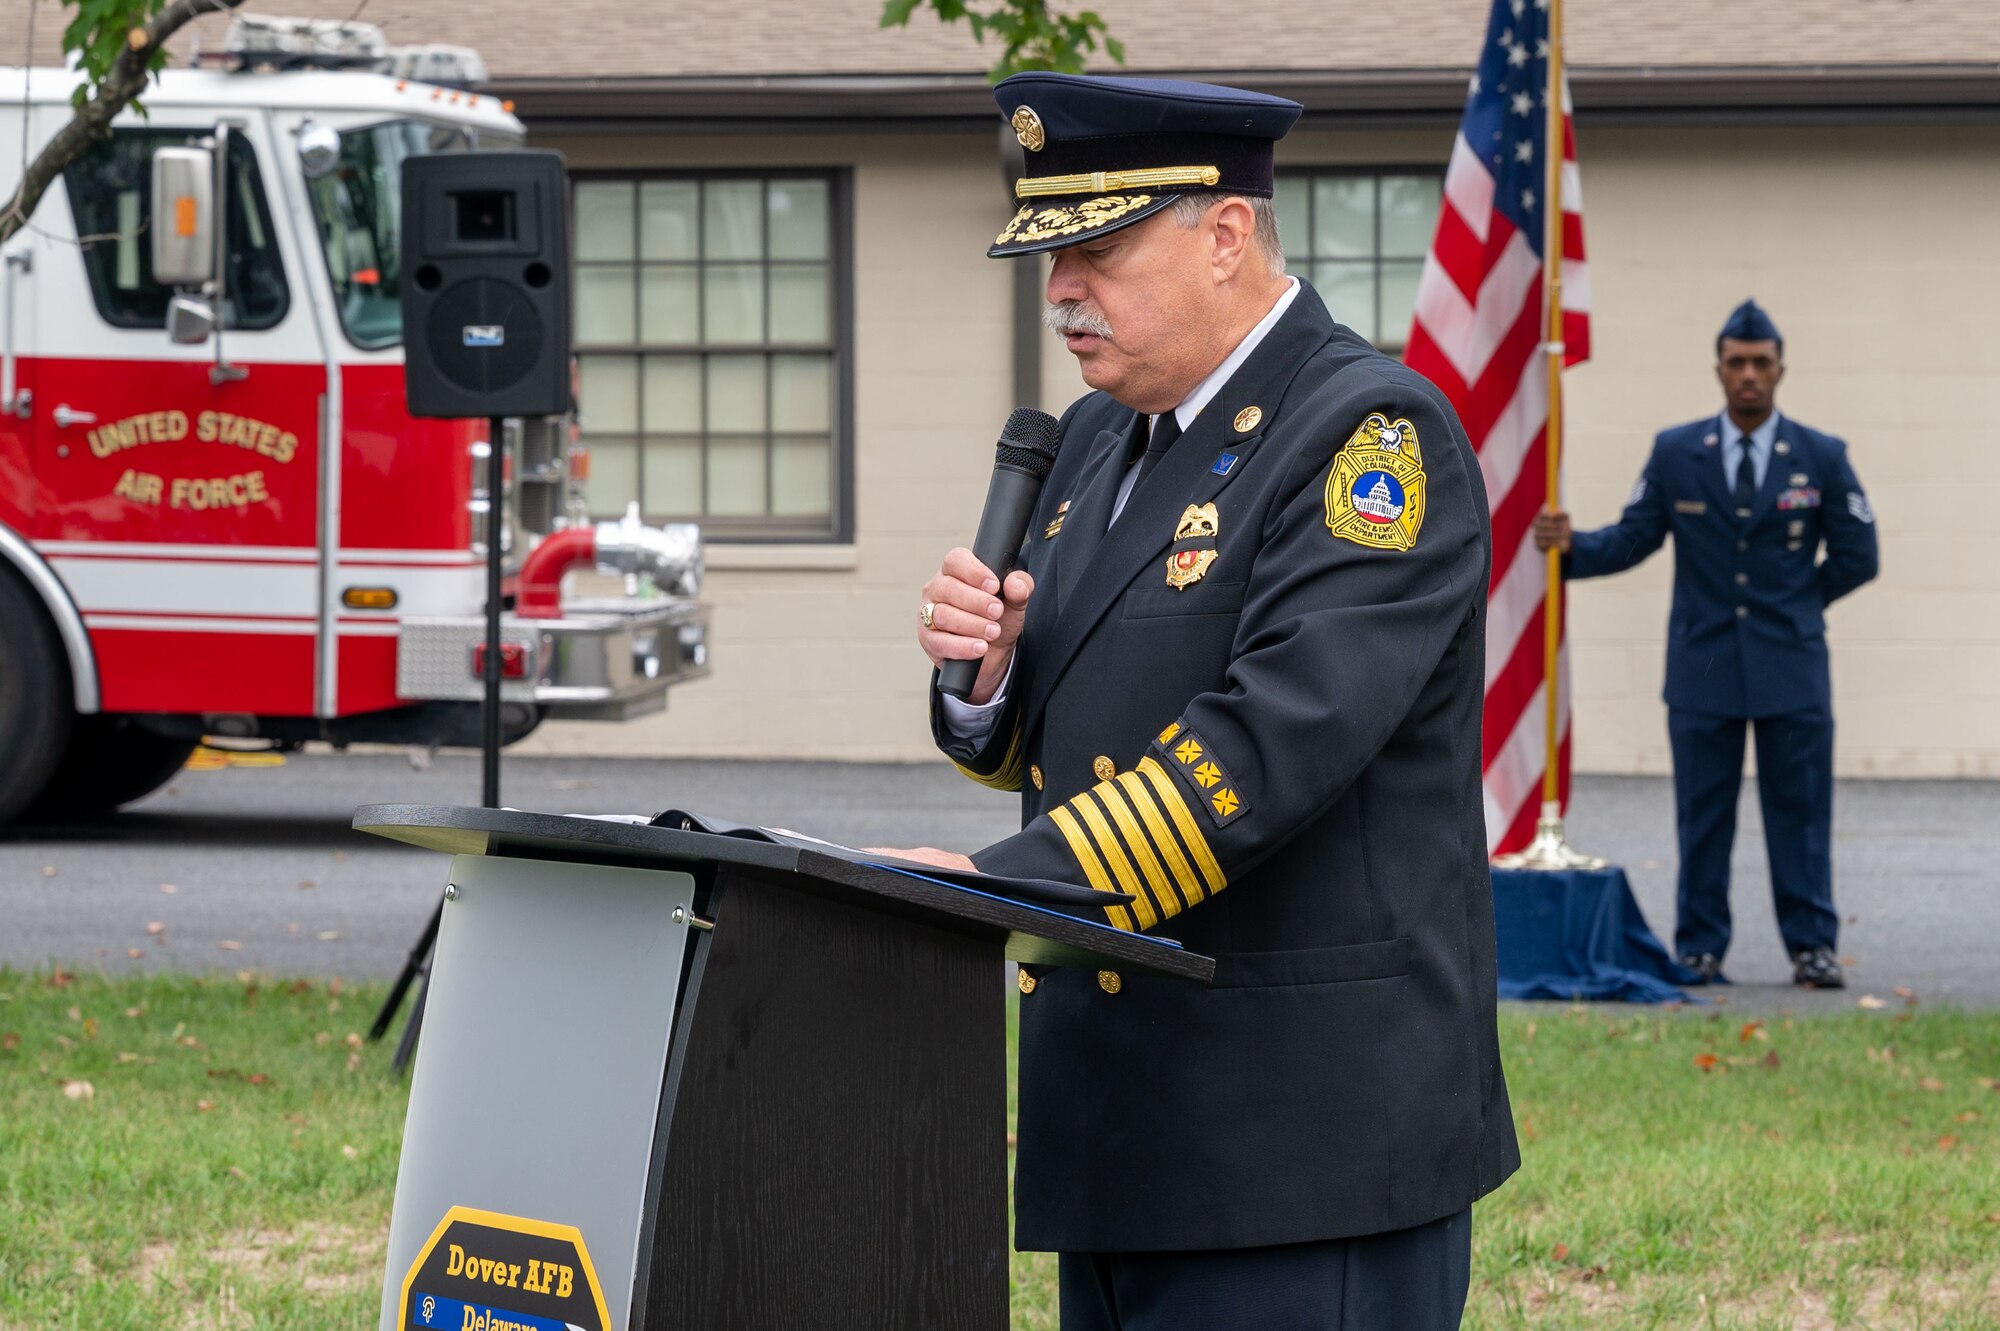 Dennis Rubin, former Washington D.C. fire chief, speaks during the 21st Anniversary 9/11 Memorial Ceremony held at the Air Mobility Command Museum on Dover Air Force Base, Delaware, Sept. 11, 2022. The base hosted the ceremony to remember and honor those who perished in the attacks on Sept. 11, 2001. (U.S. Air Force photo by Senior Airman Cydney Lee)